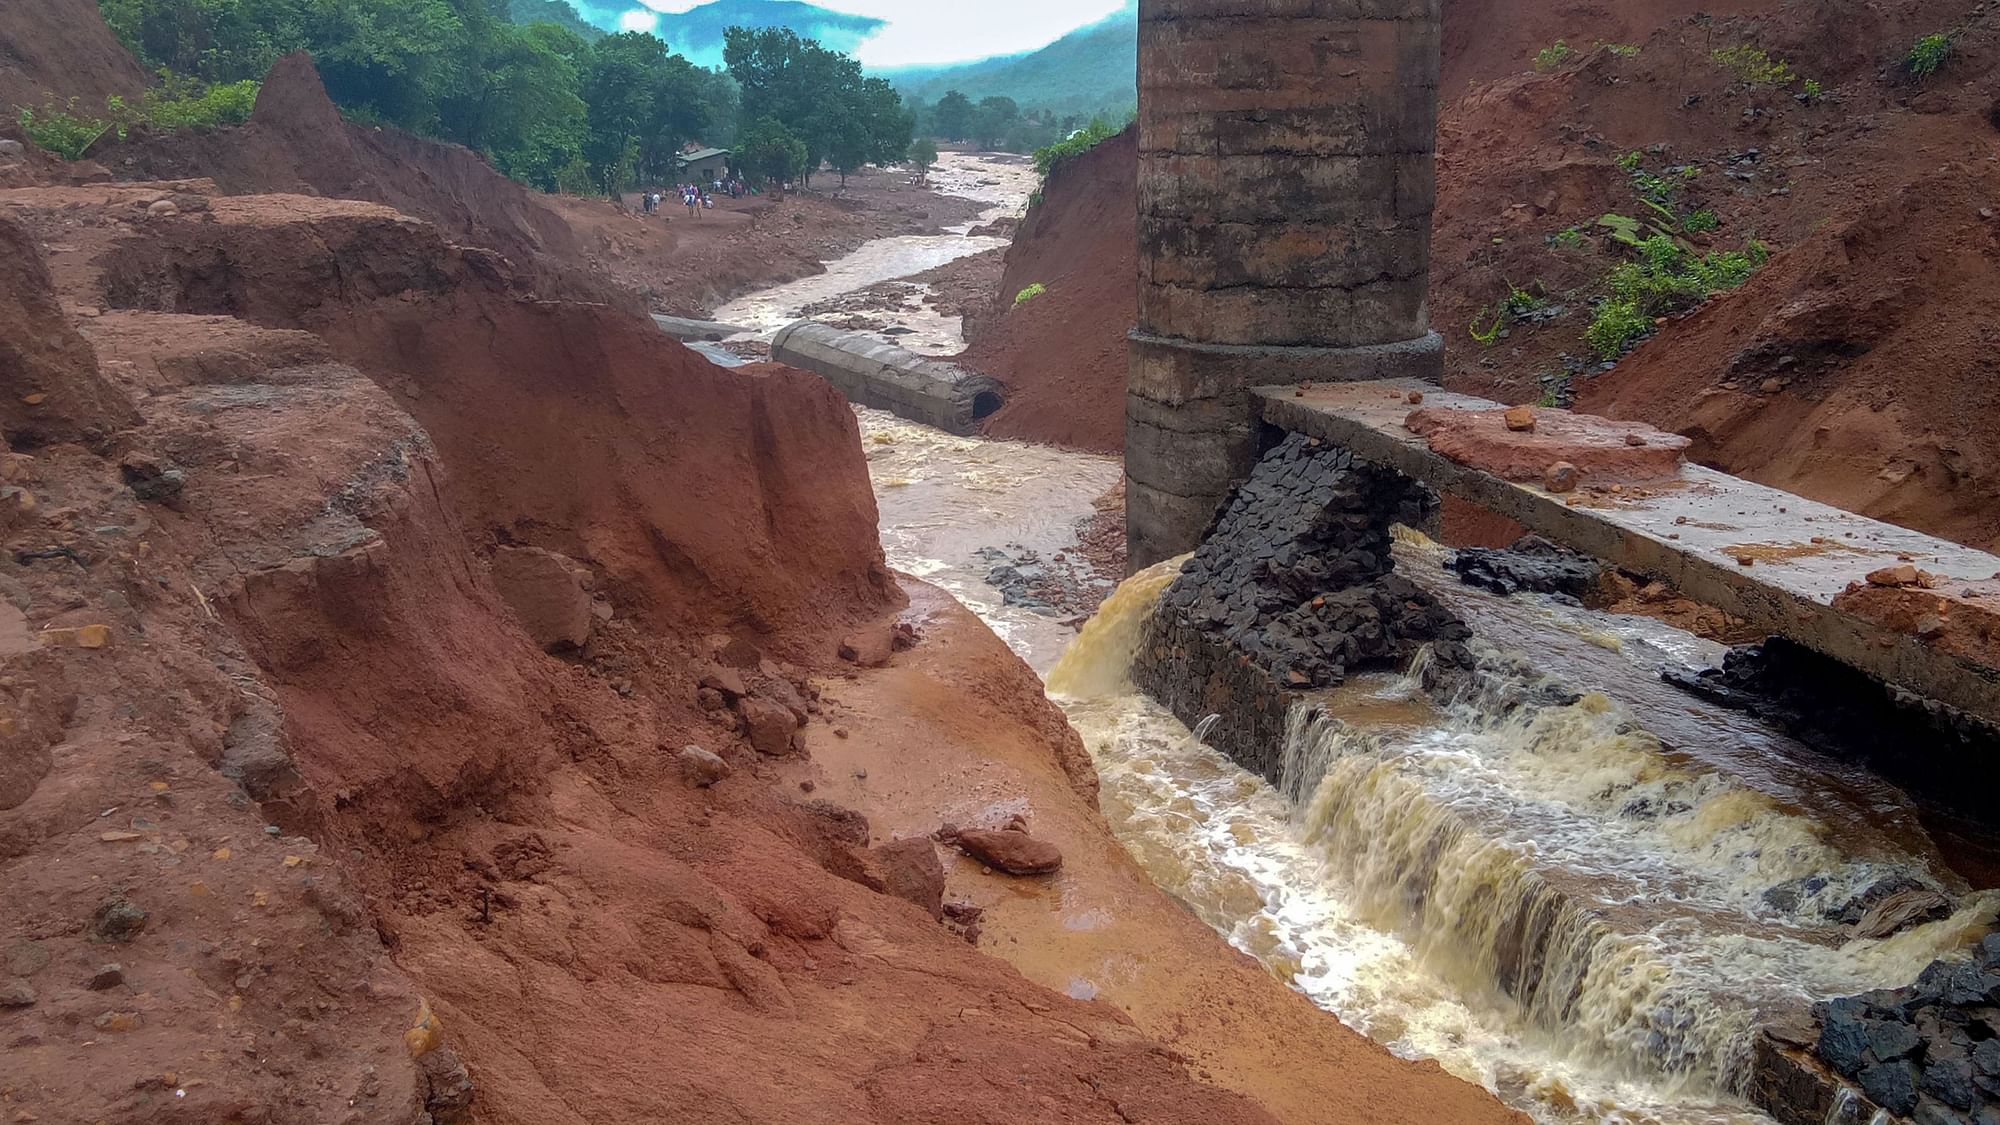  The Tiware dam in Chiplun taluka of Ratnagiri district breached late on Tuesday night.